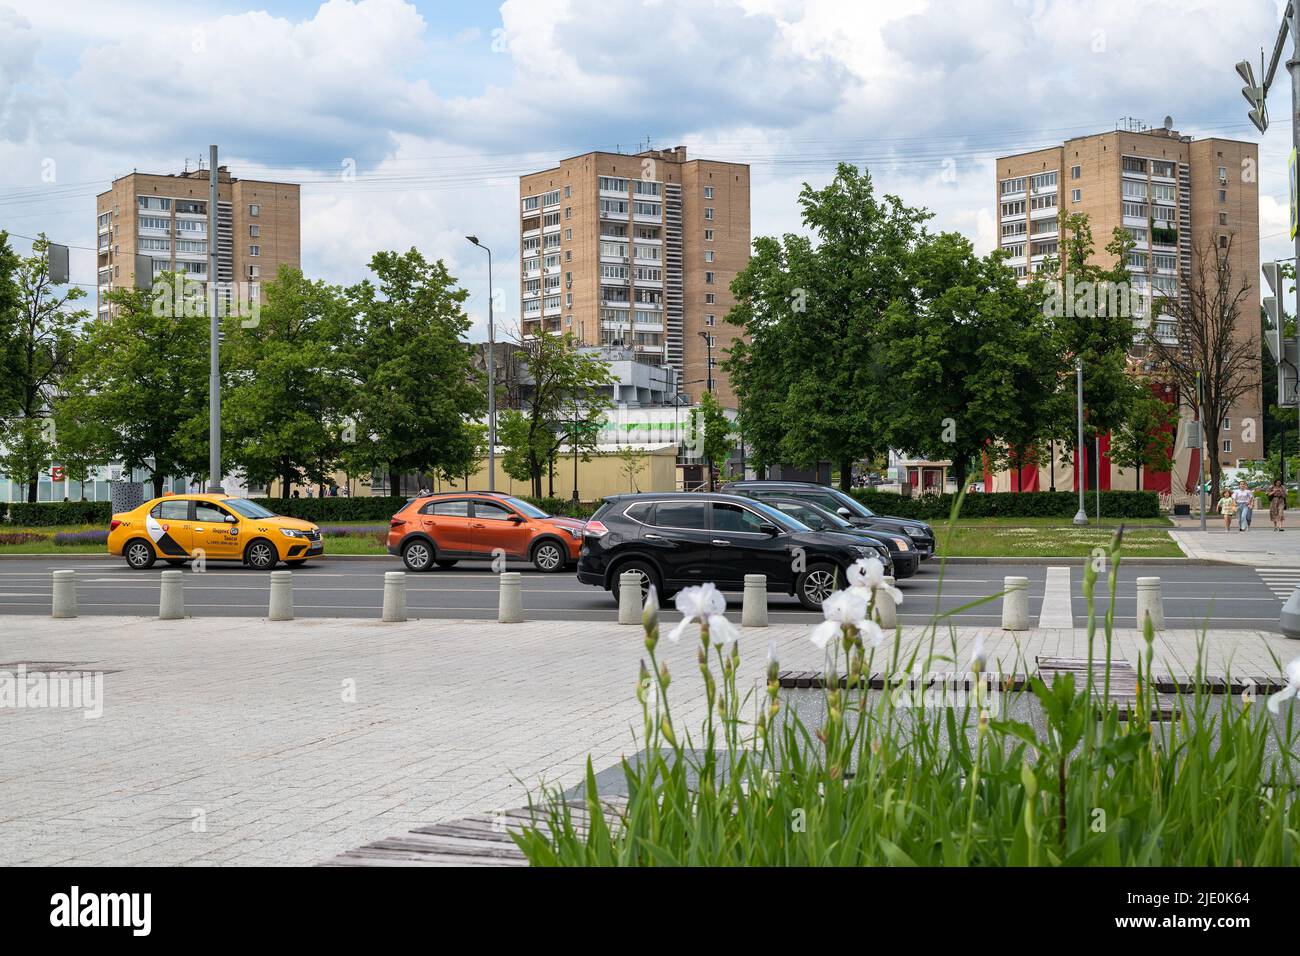 Moscow, Russia - June 14. 2022. Square on Central Square in Zelenograd Stock Photo